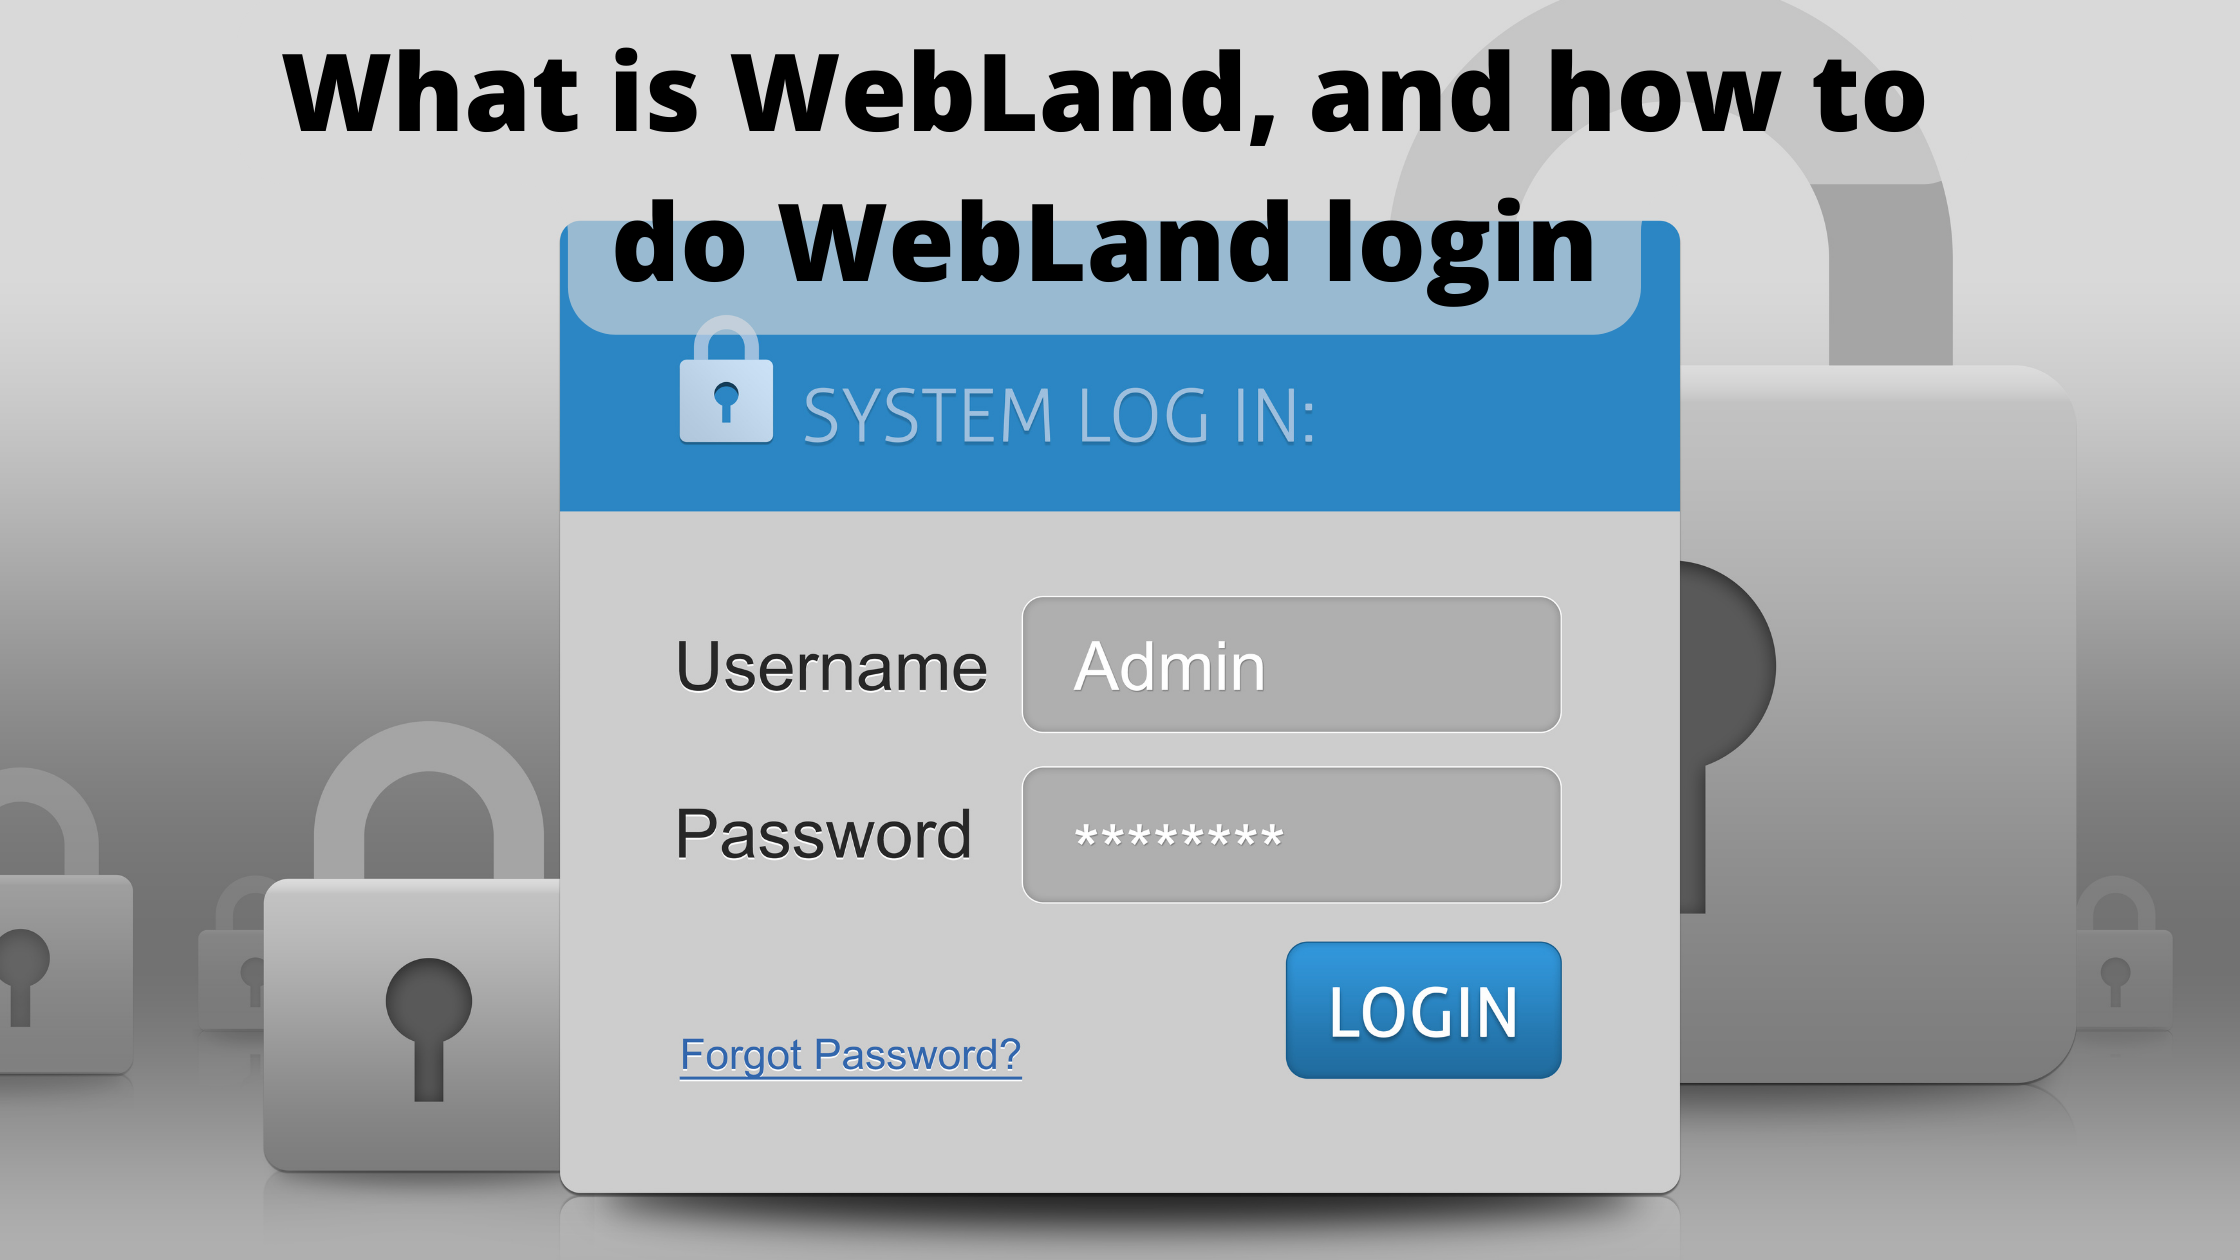 What is WebLand, and how to do WebLand login